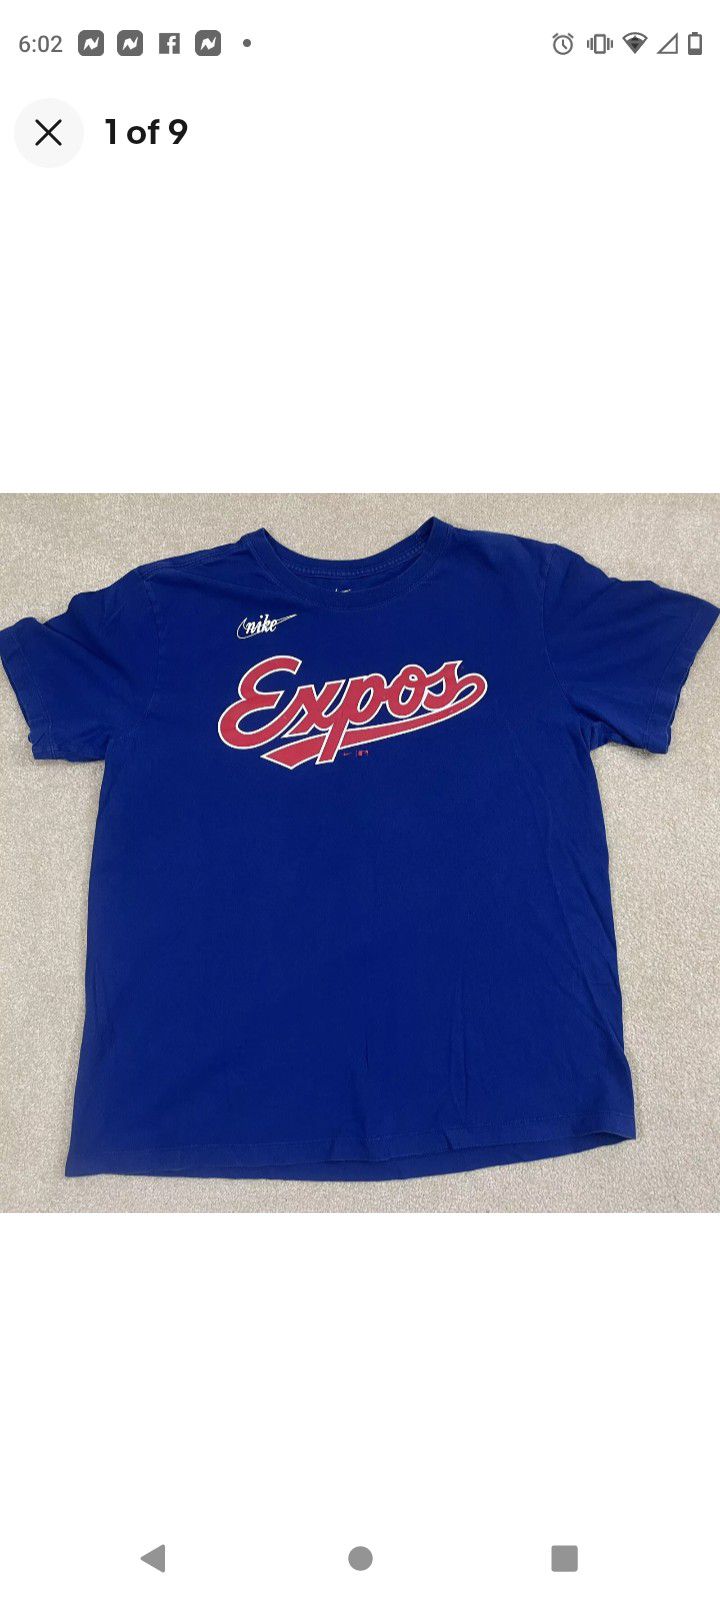 Awesome Old School Montreal Expos Jersey/Shirt For Star Vladimir Guerrero!!